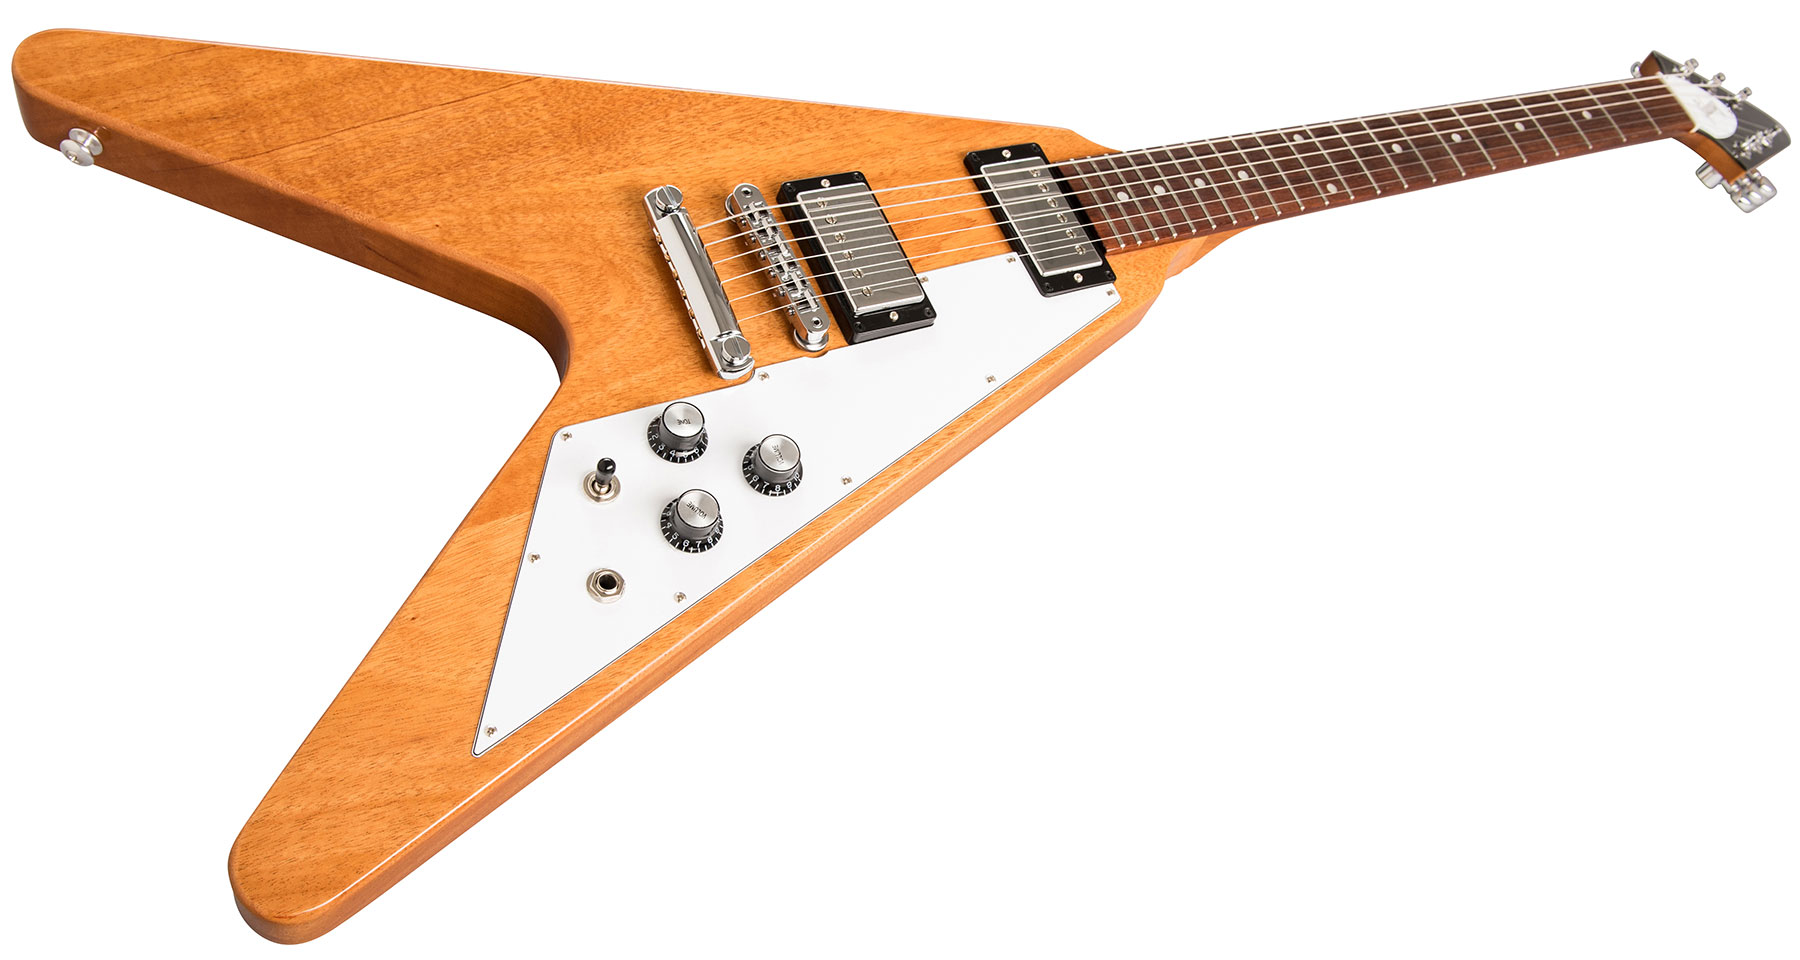 Gibson Flying V 2019 Hh Ht Rw - Antique Natural - Metal electric guitar - Variation 1